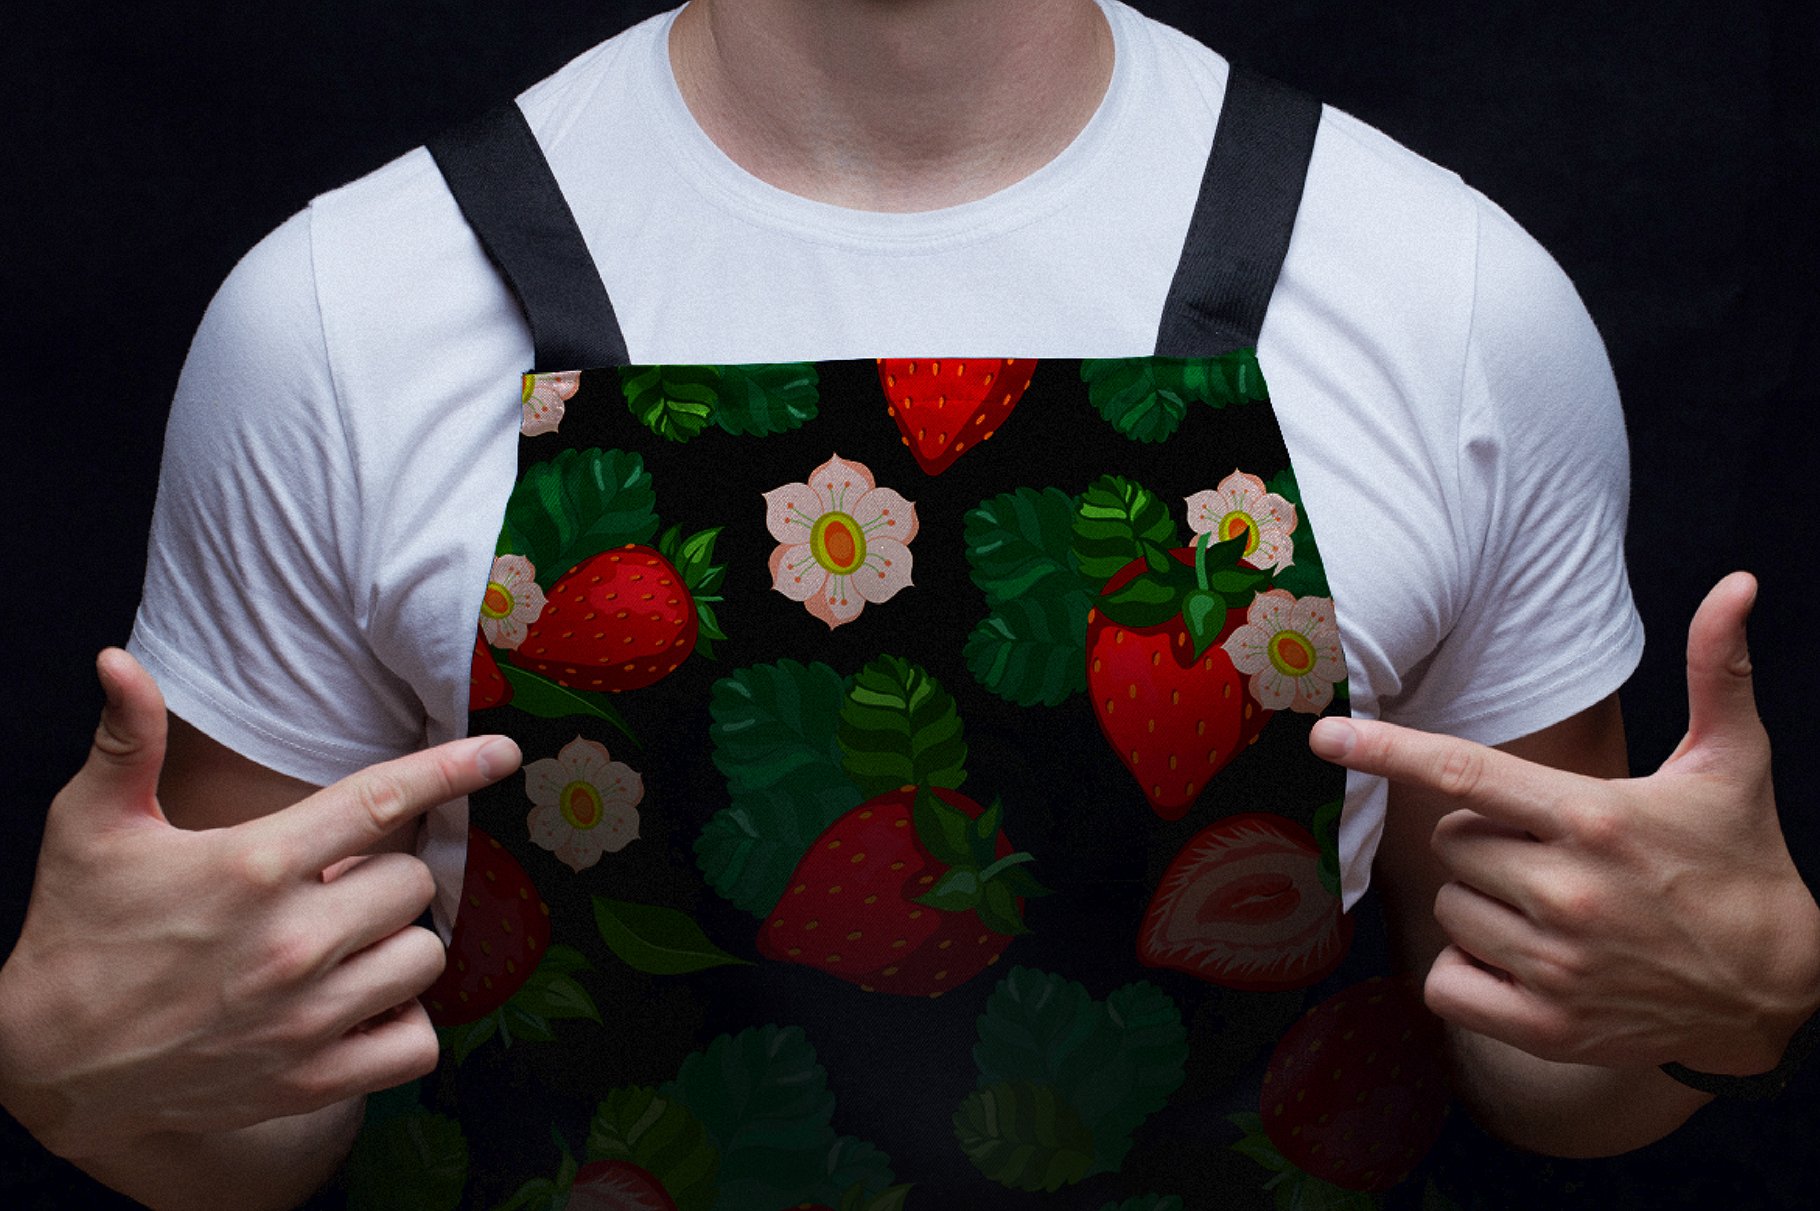 Black kitchen apron with strawberry illustrations on a man.